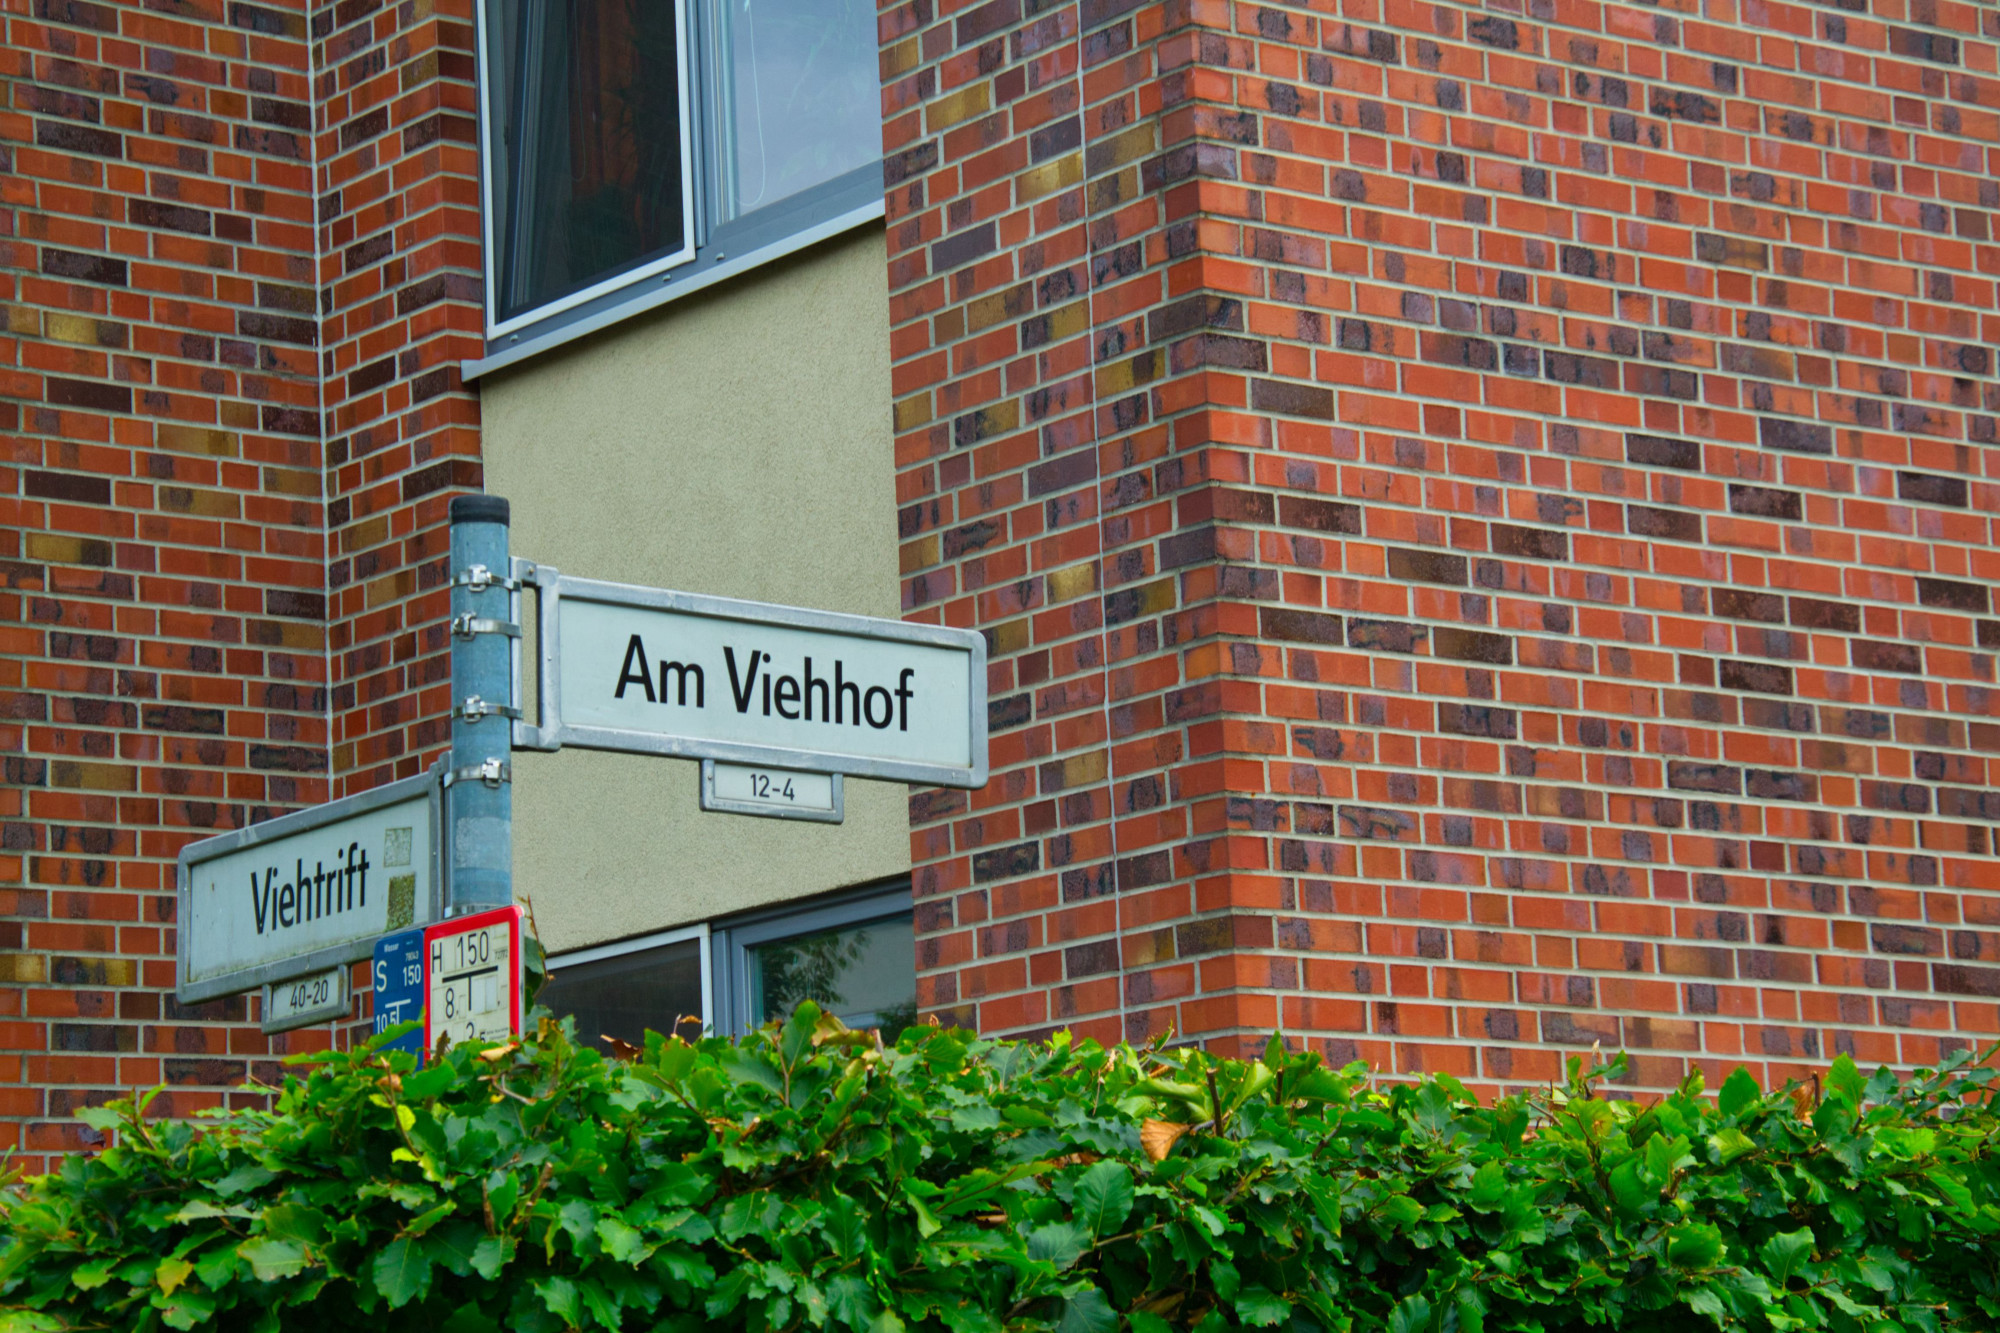 Photography of a street corner with a street sign with two street names: "Am Viehof" and "Viehtrift". In the foreground is a green hedge and in the background is a brick building.